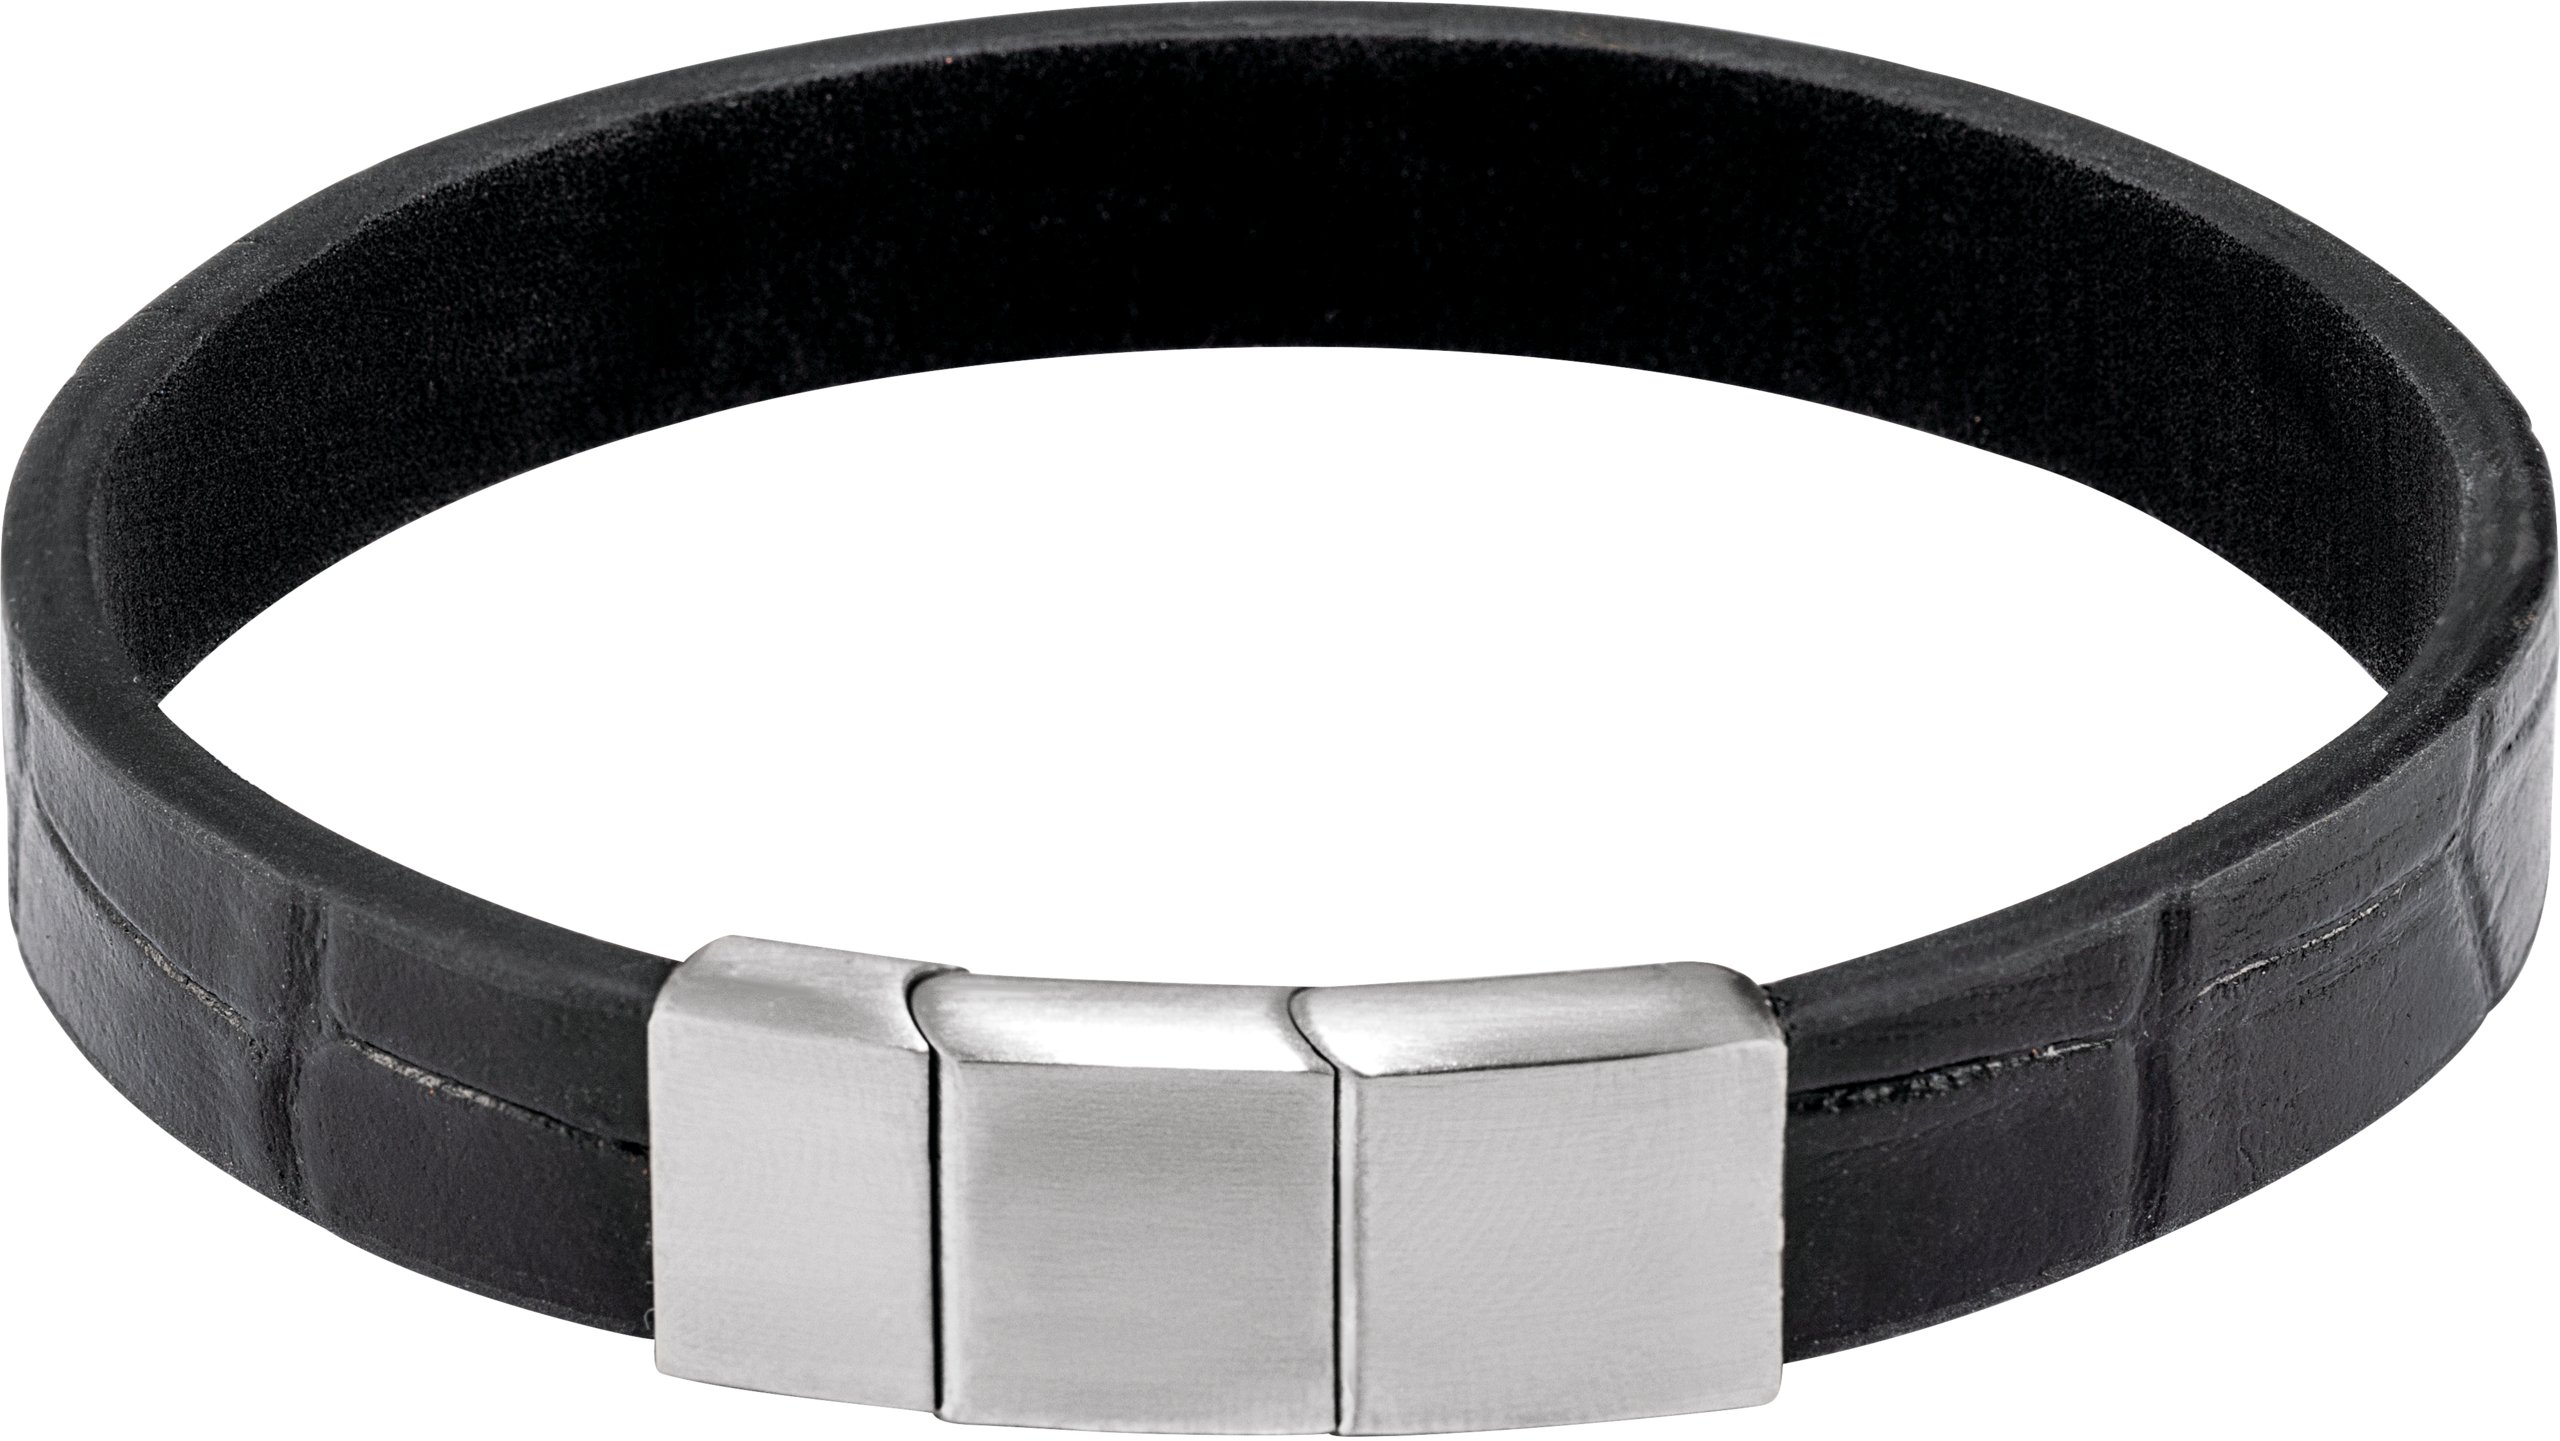 Stainless Steel 11 mm Black Leather 8